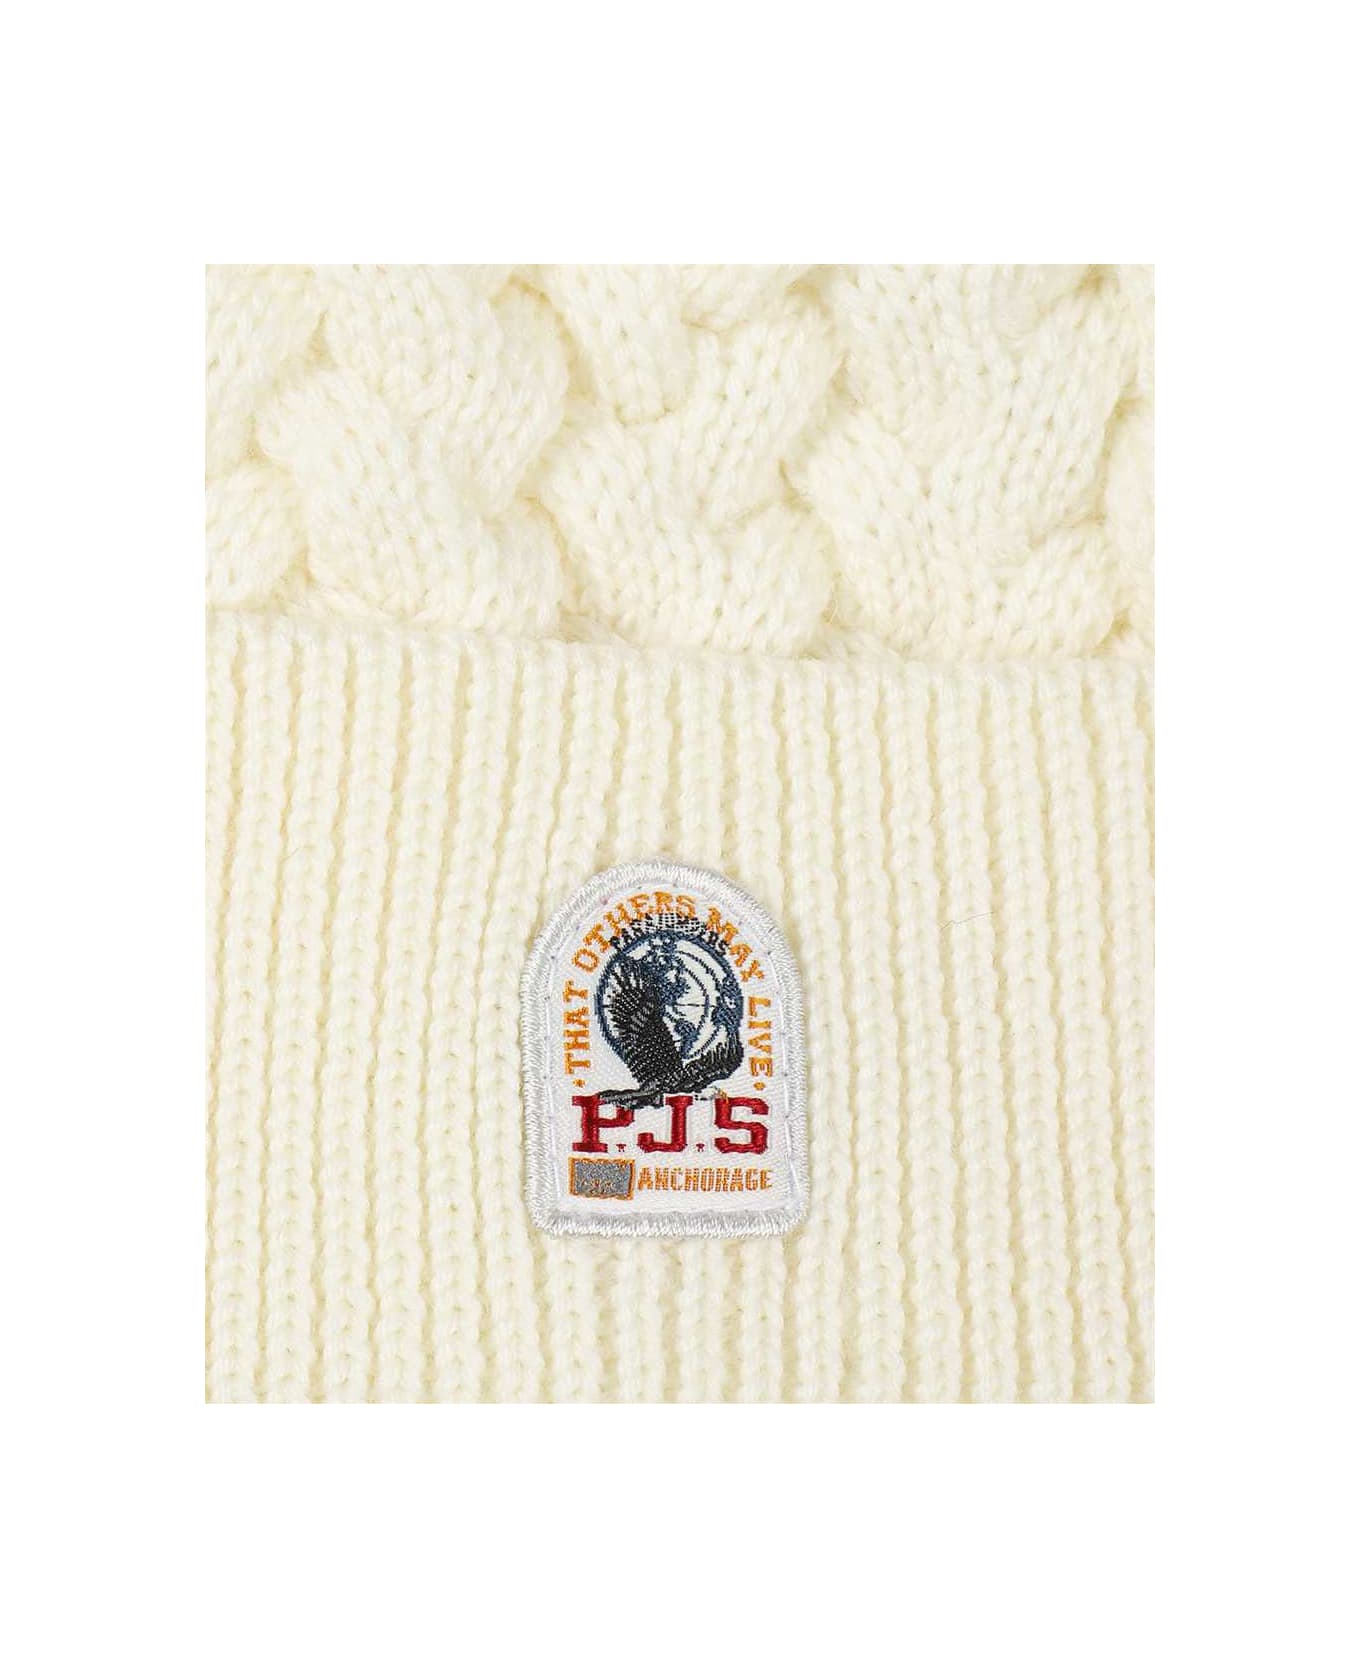 Parajumpers Knitted Beanie With Pom-pom - panna